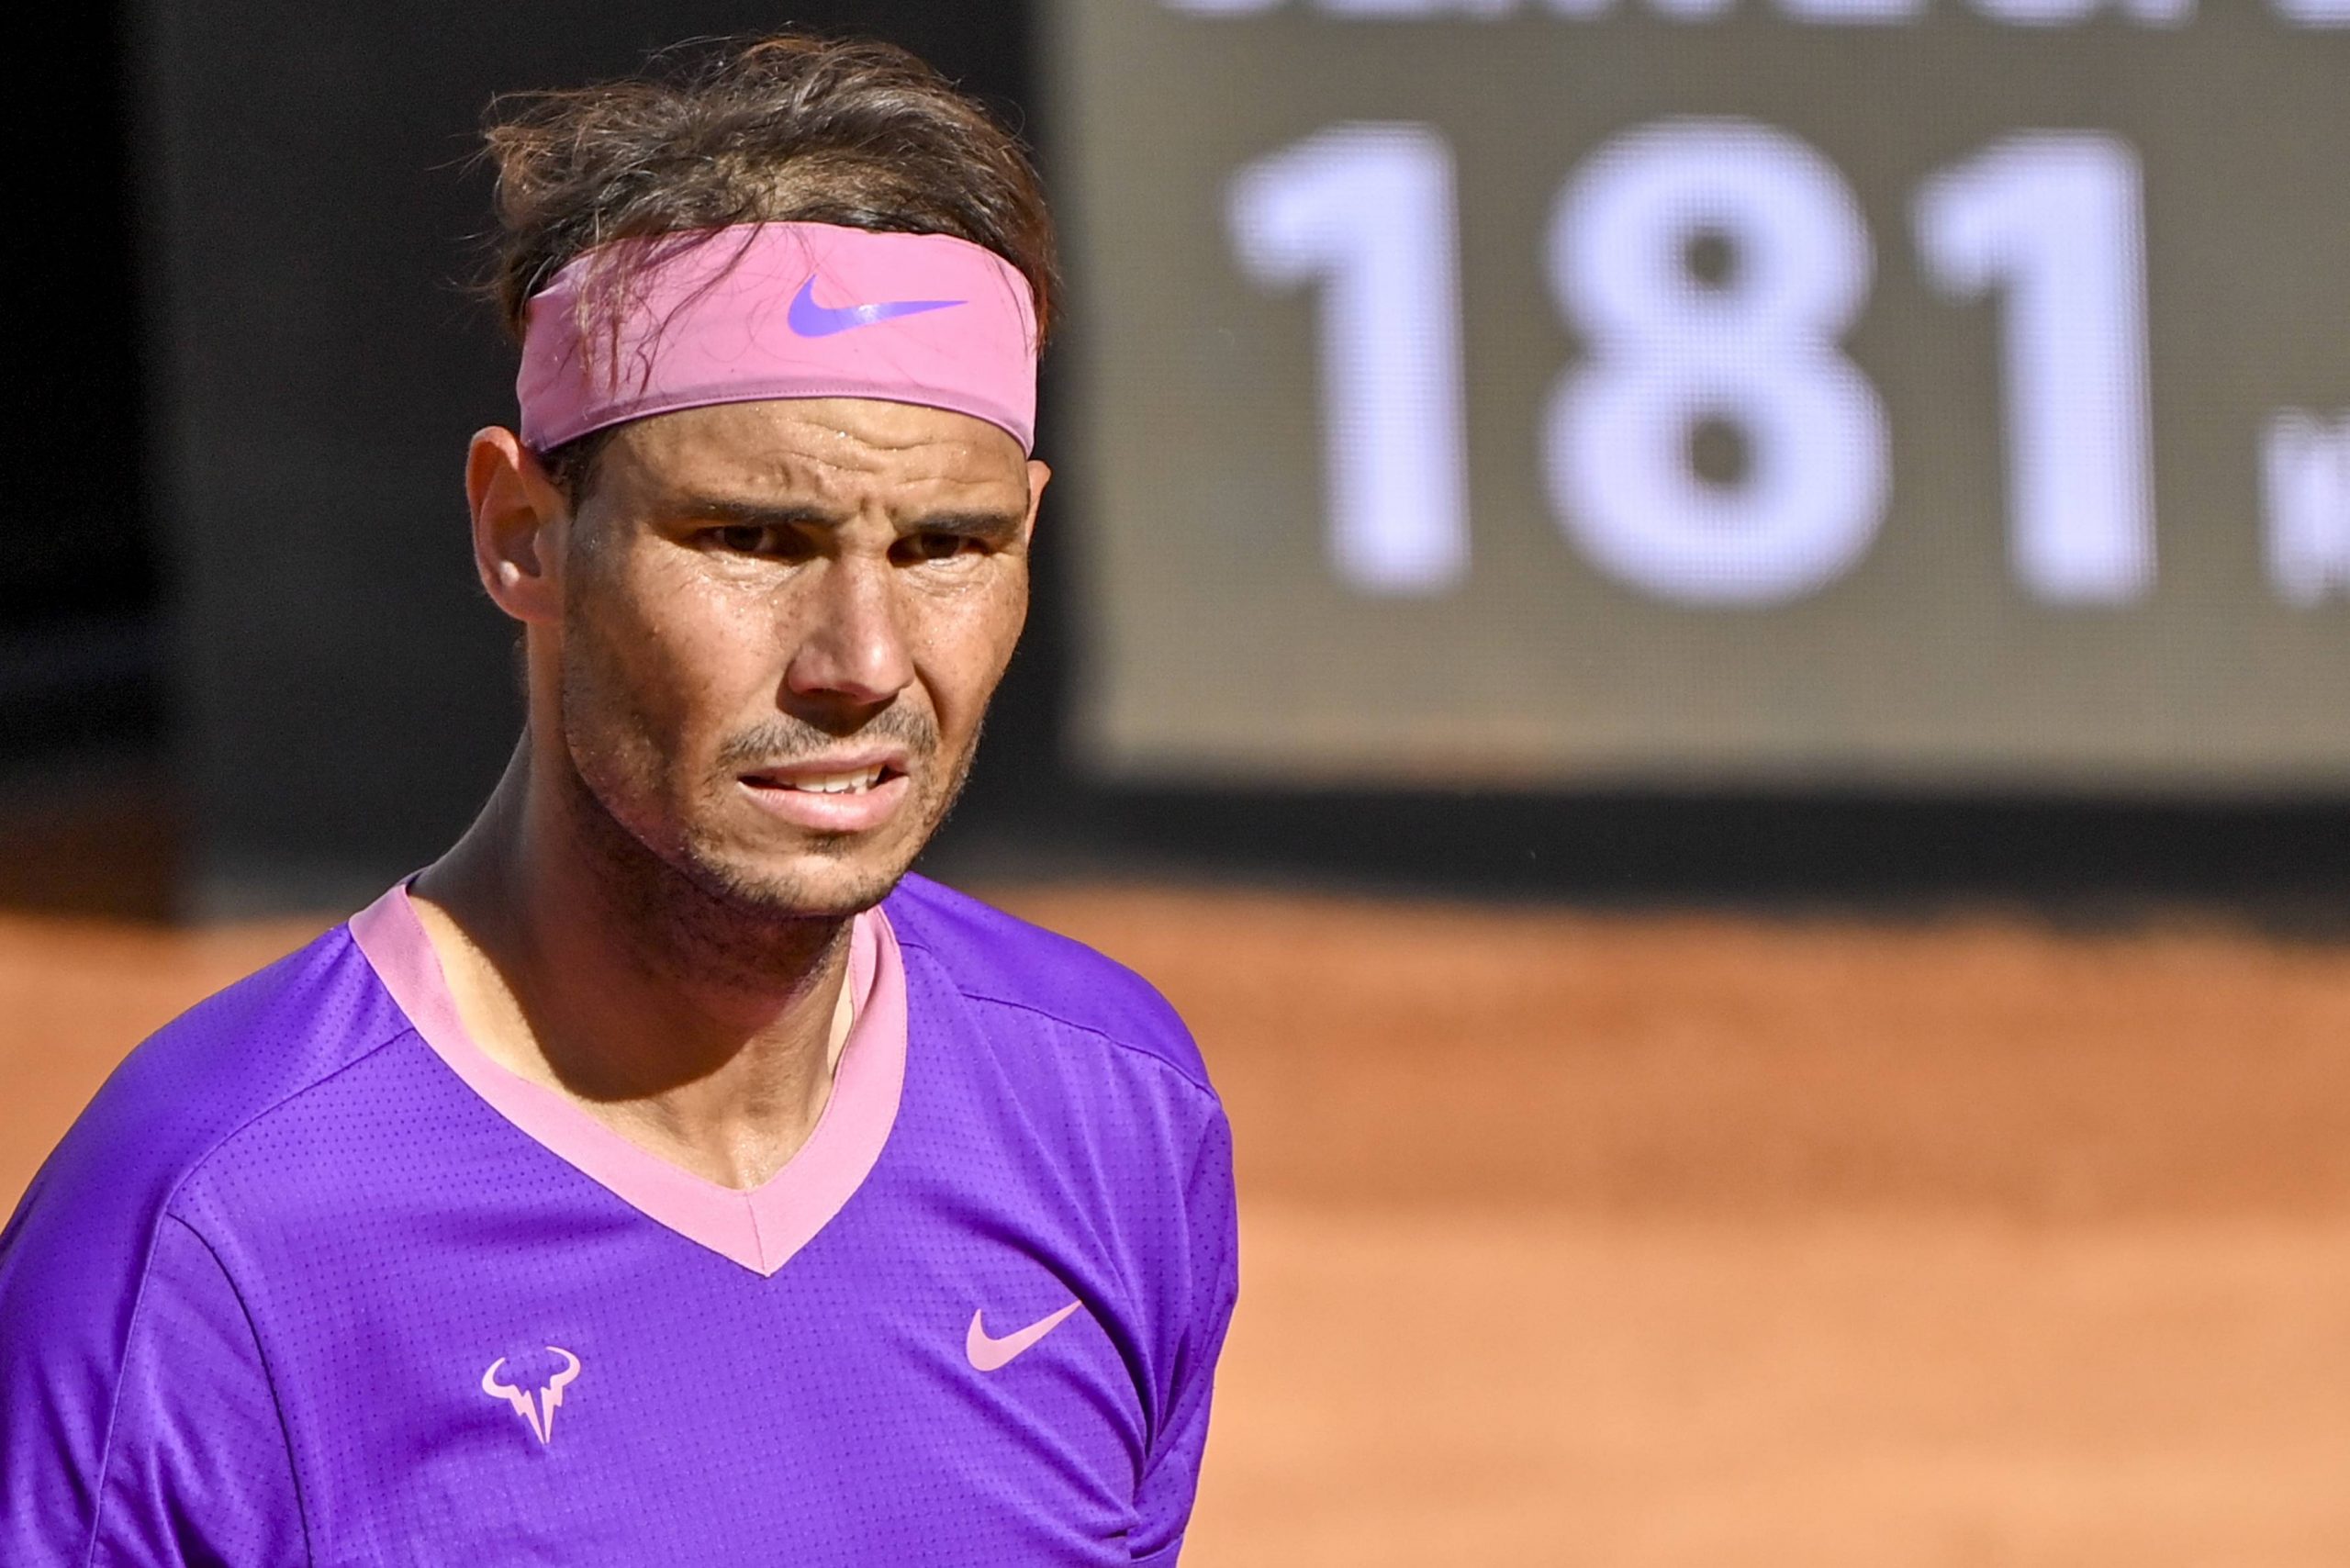 Spain's Rafa Nadal gets COVID-19 after returning to Spain from Abu Dhabi tournament